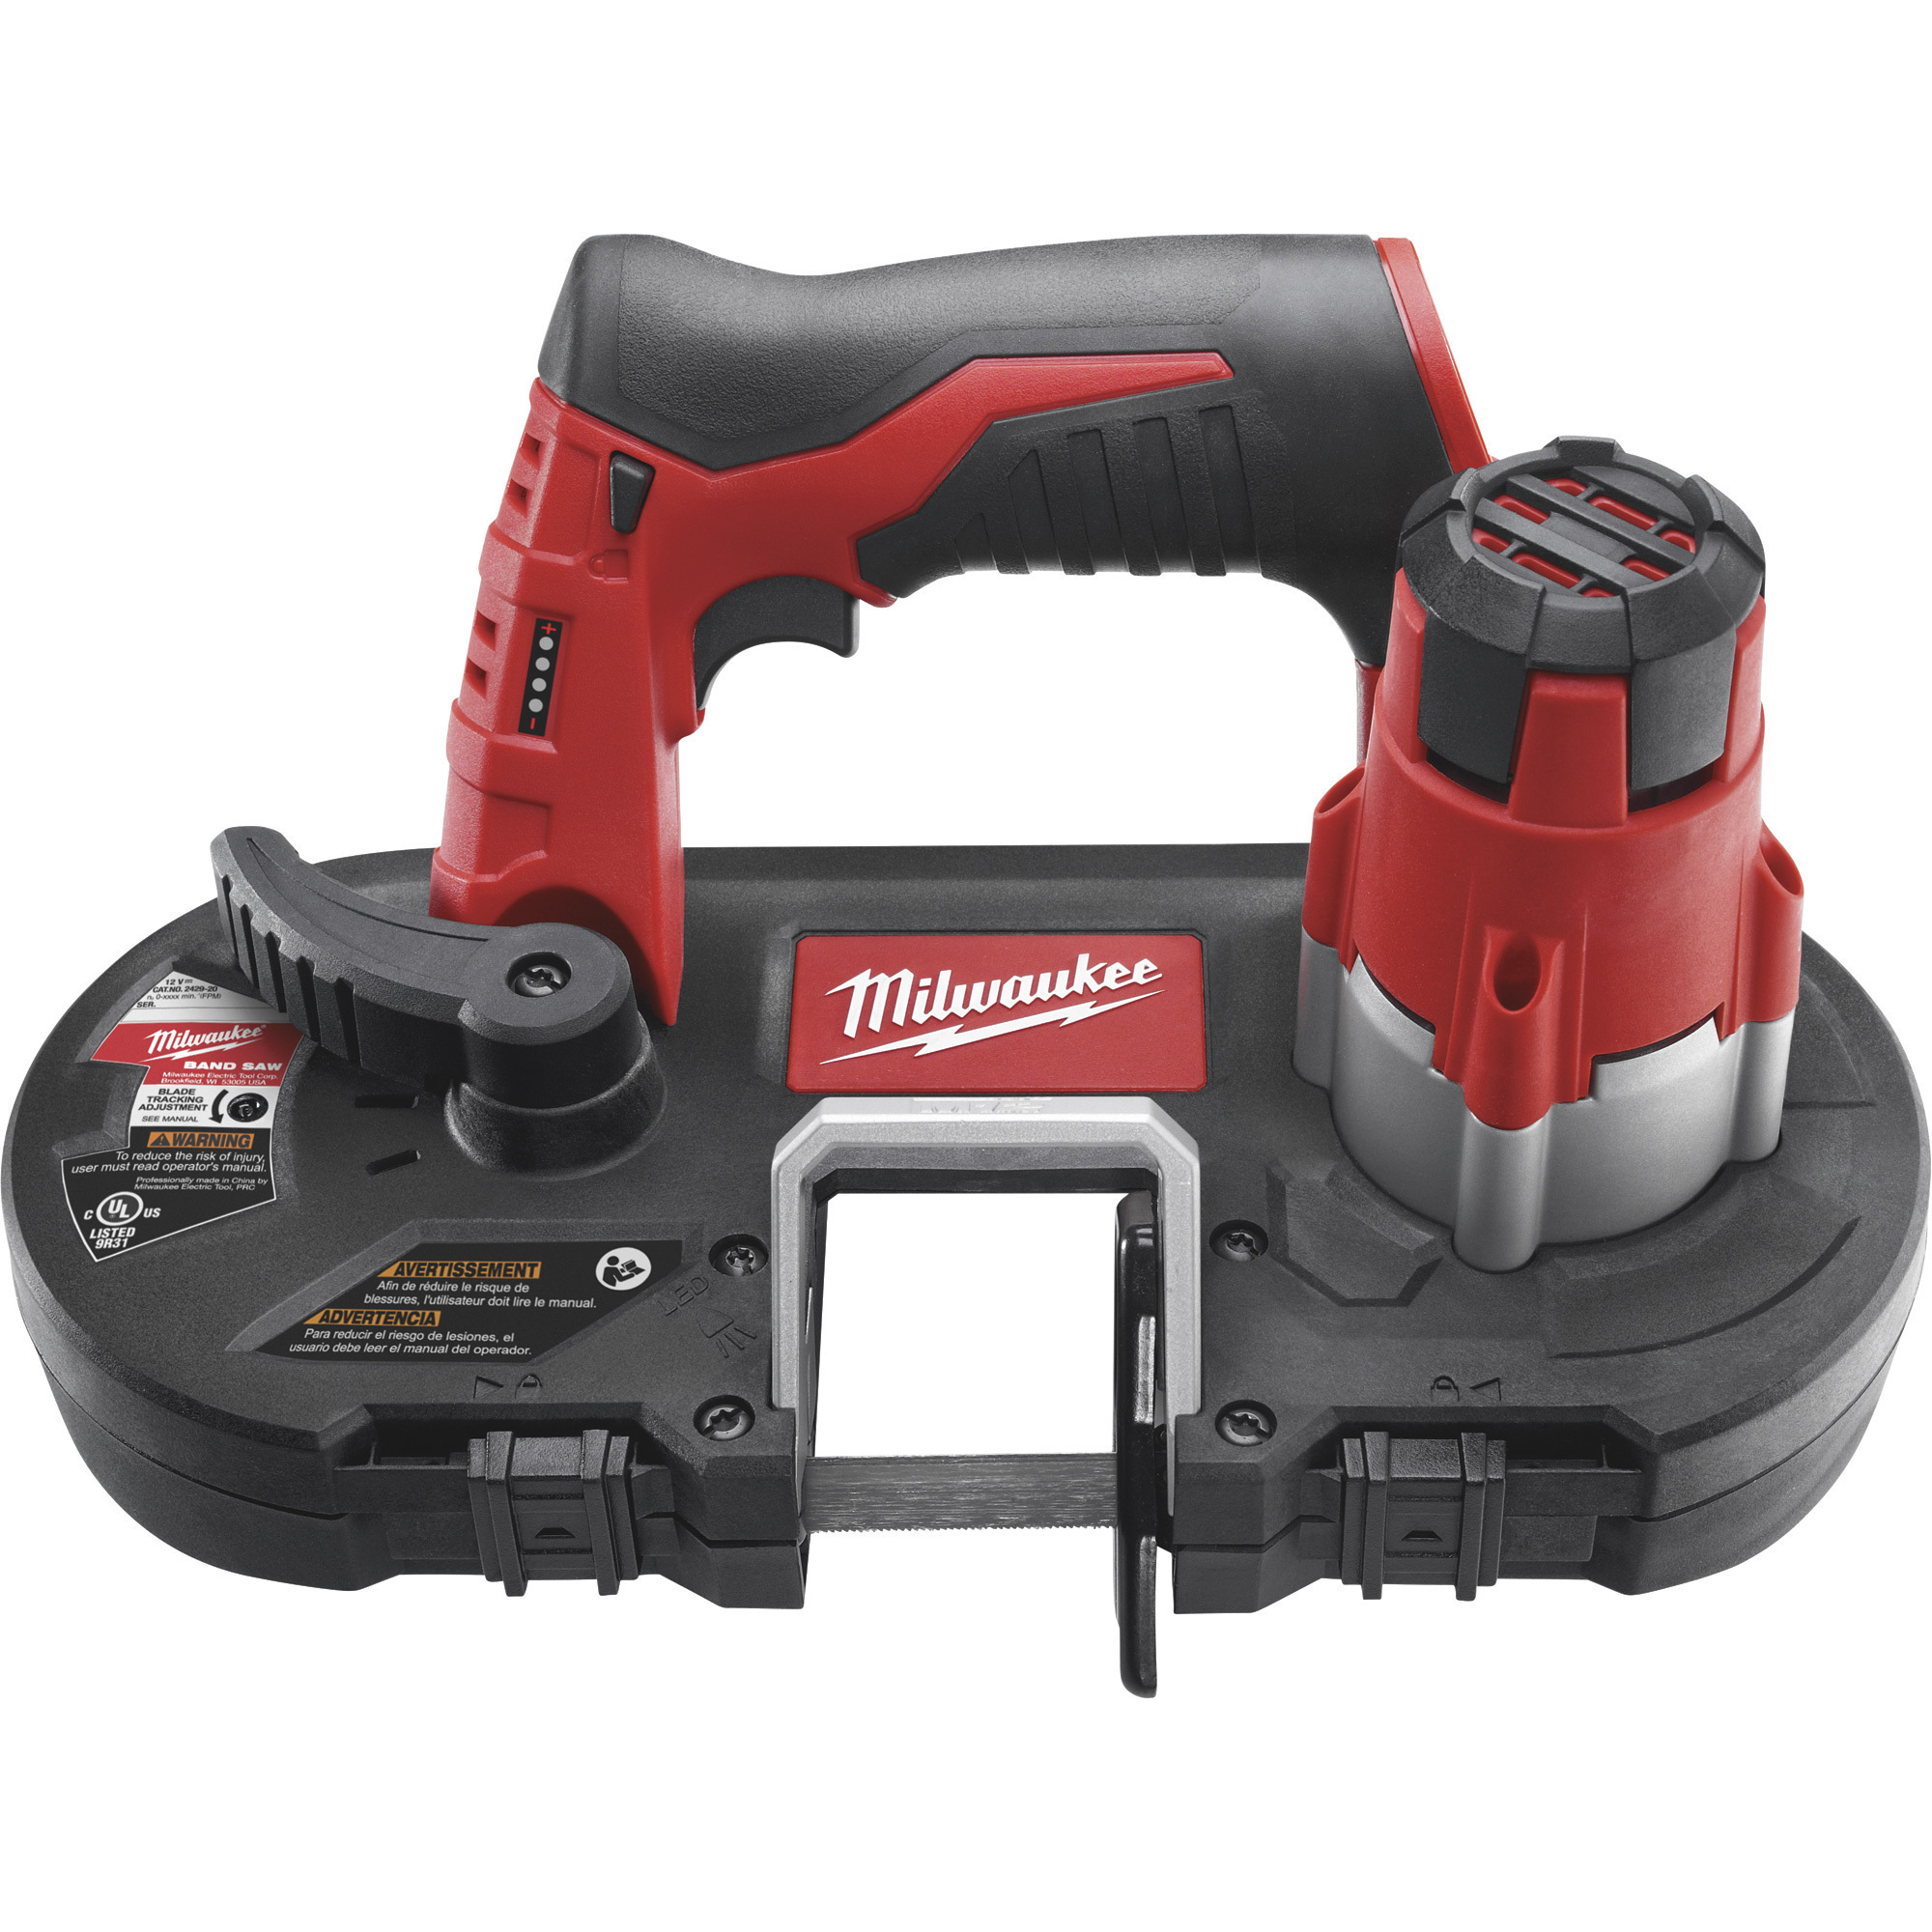 Milwaukee M12 Sub-Compact Cordless Band Saw, Tool Only, Model 2429-20